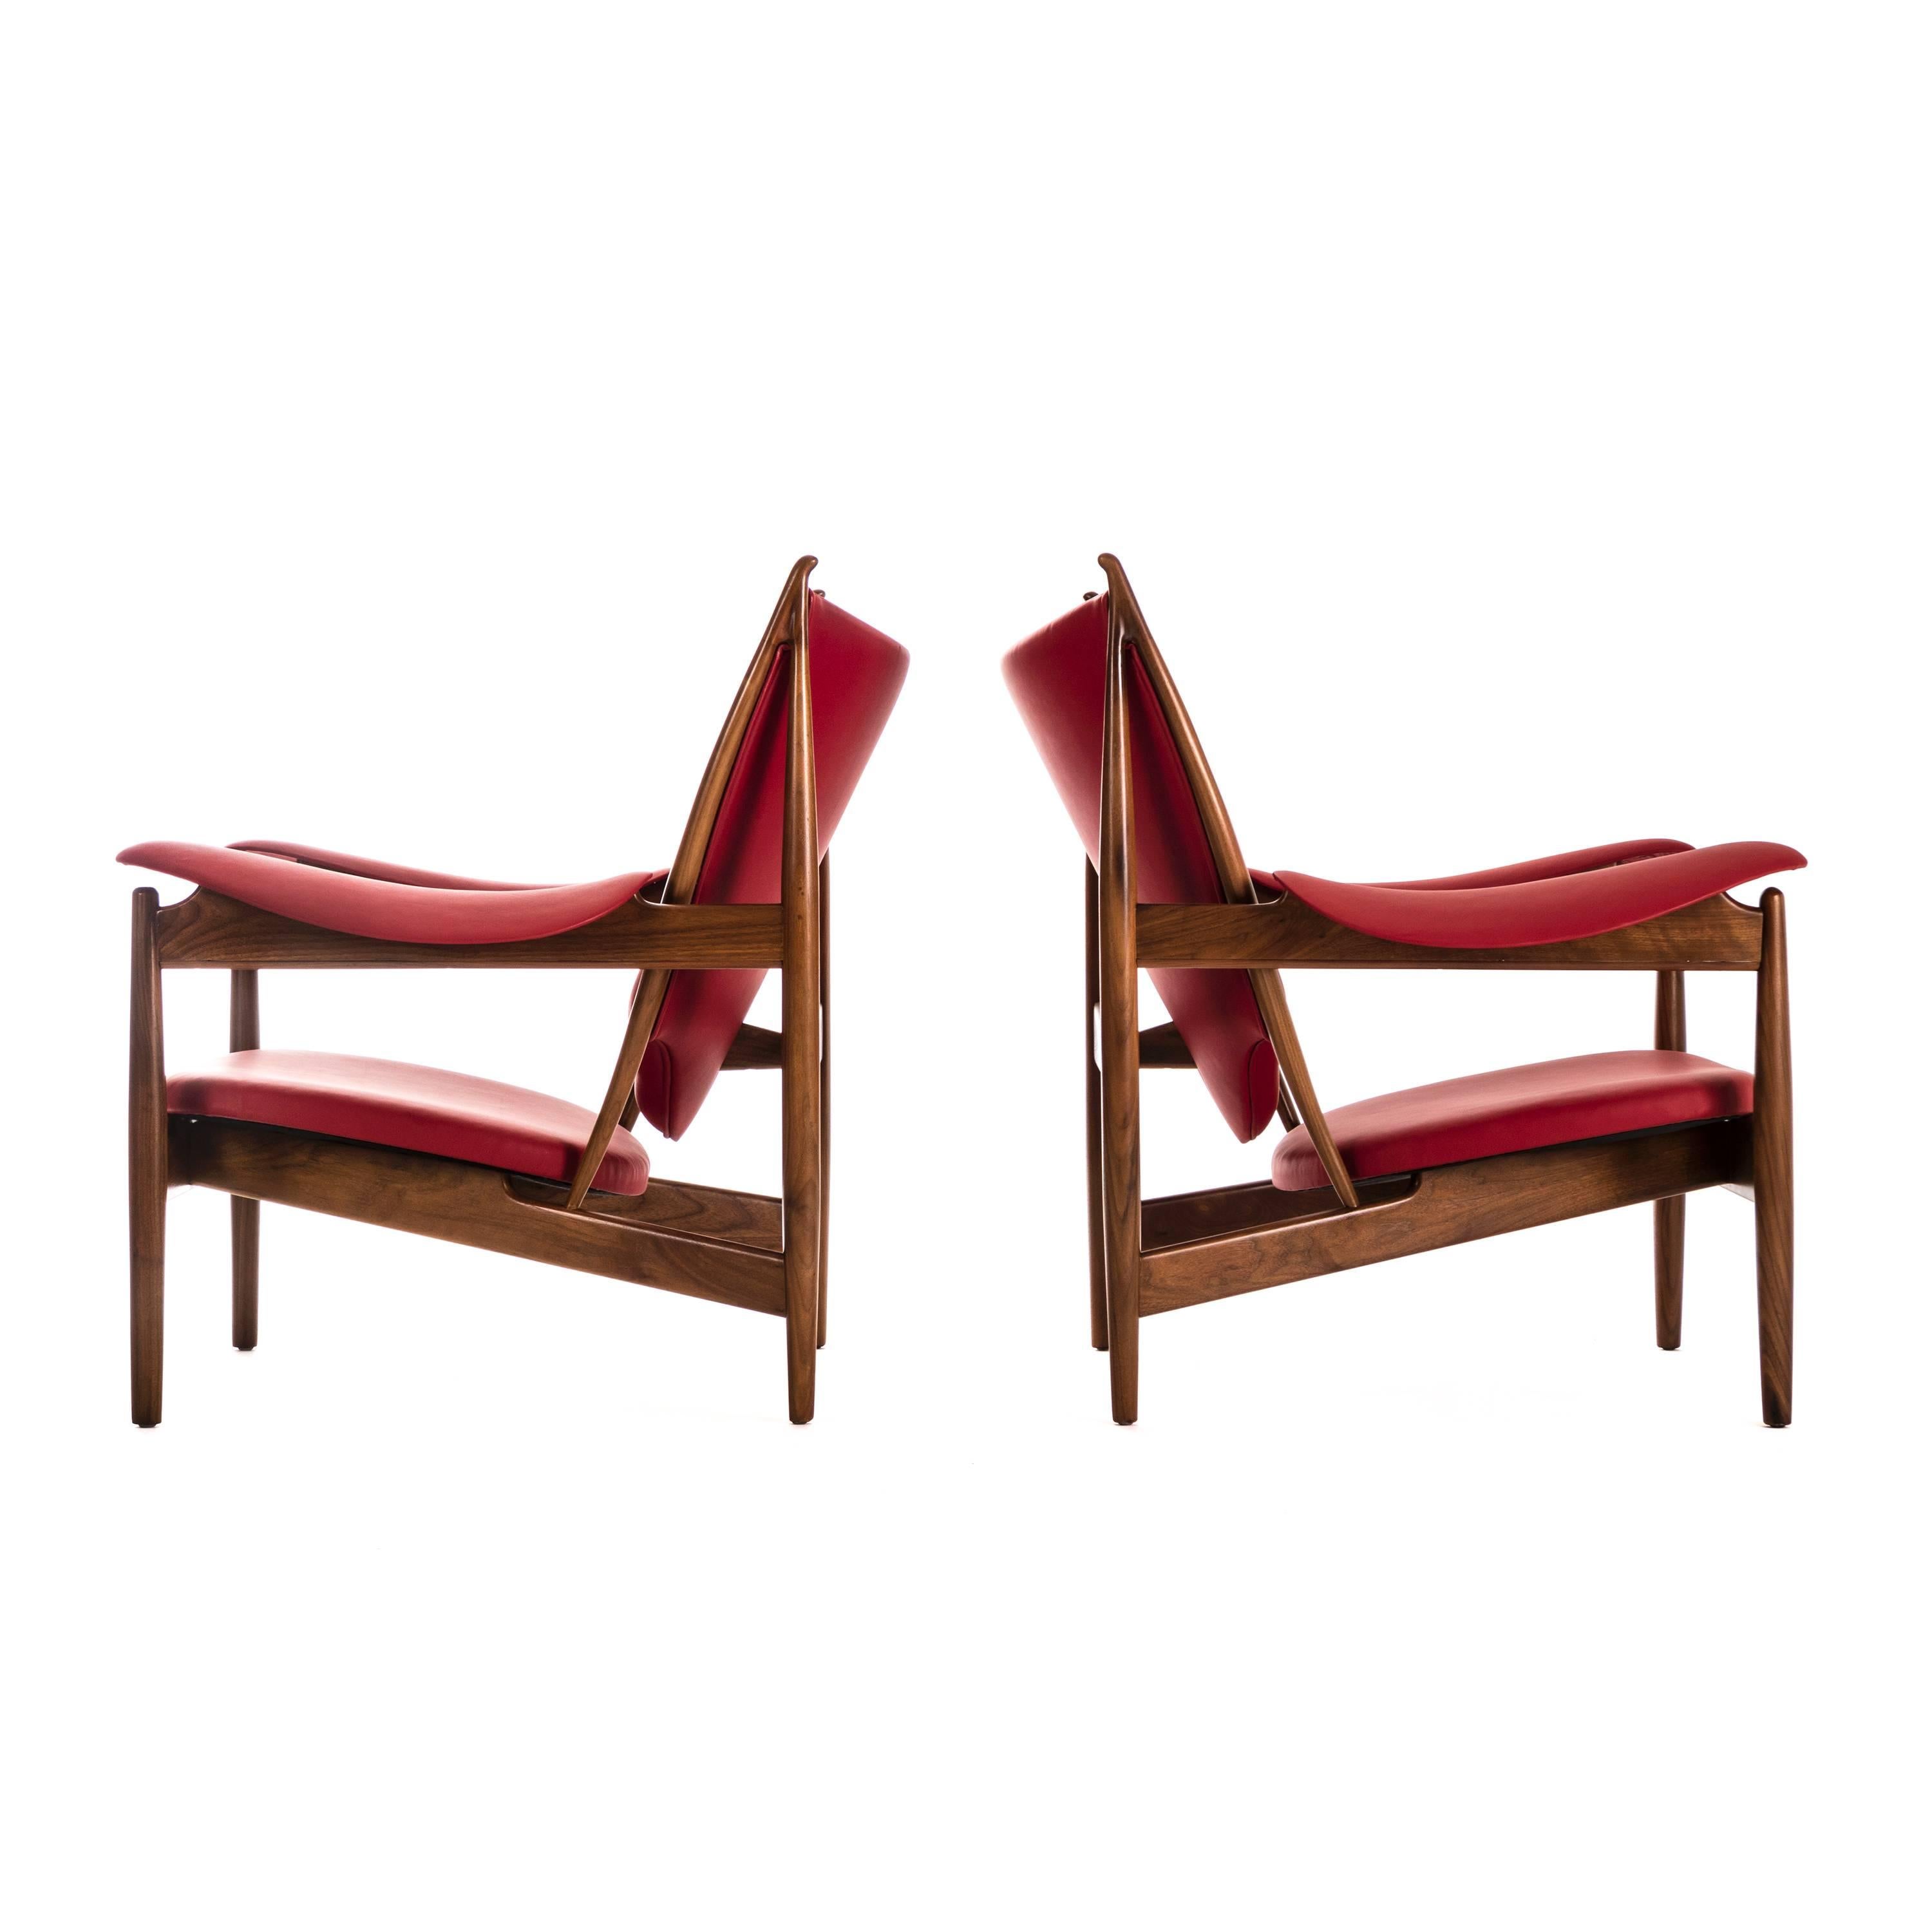 Pair of Finn Juhl Chieftain lounge chairs for Baker Furniture Company. These are a 1990s production of Finn Juhl's original 1951 design. Metal label on underside read [Finn Juhl Baker Furniture]. Reupholstered with Edelman leather.